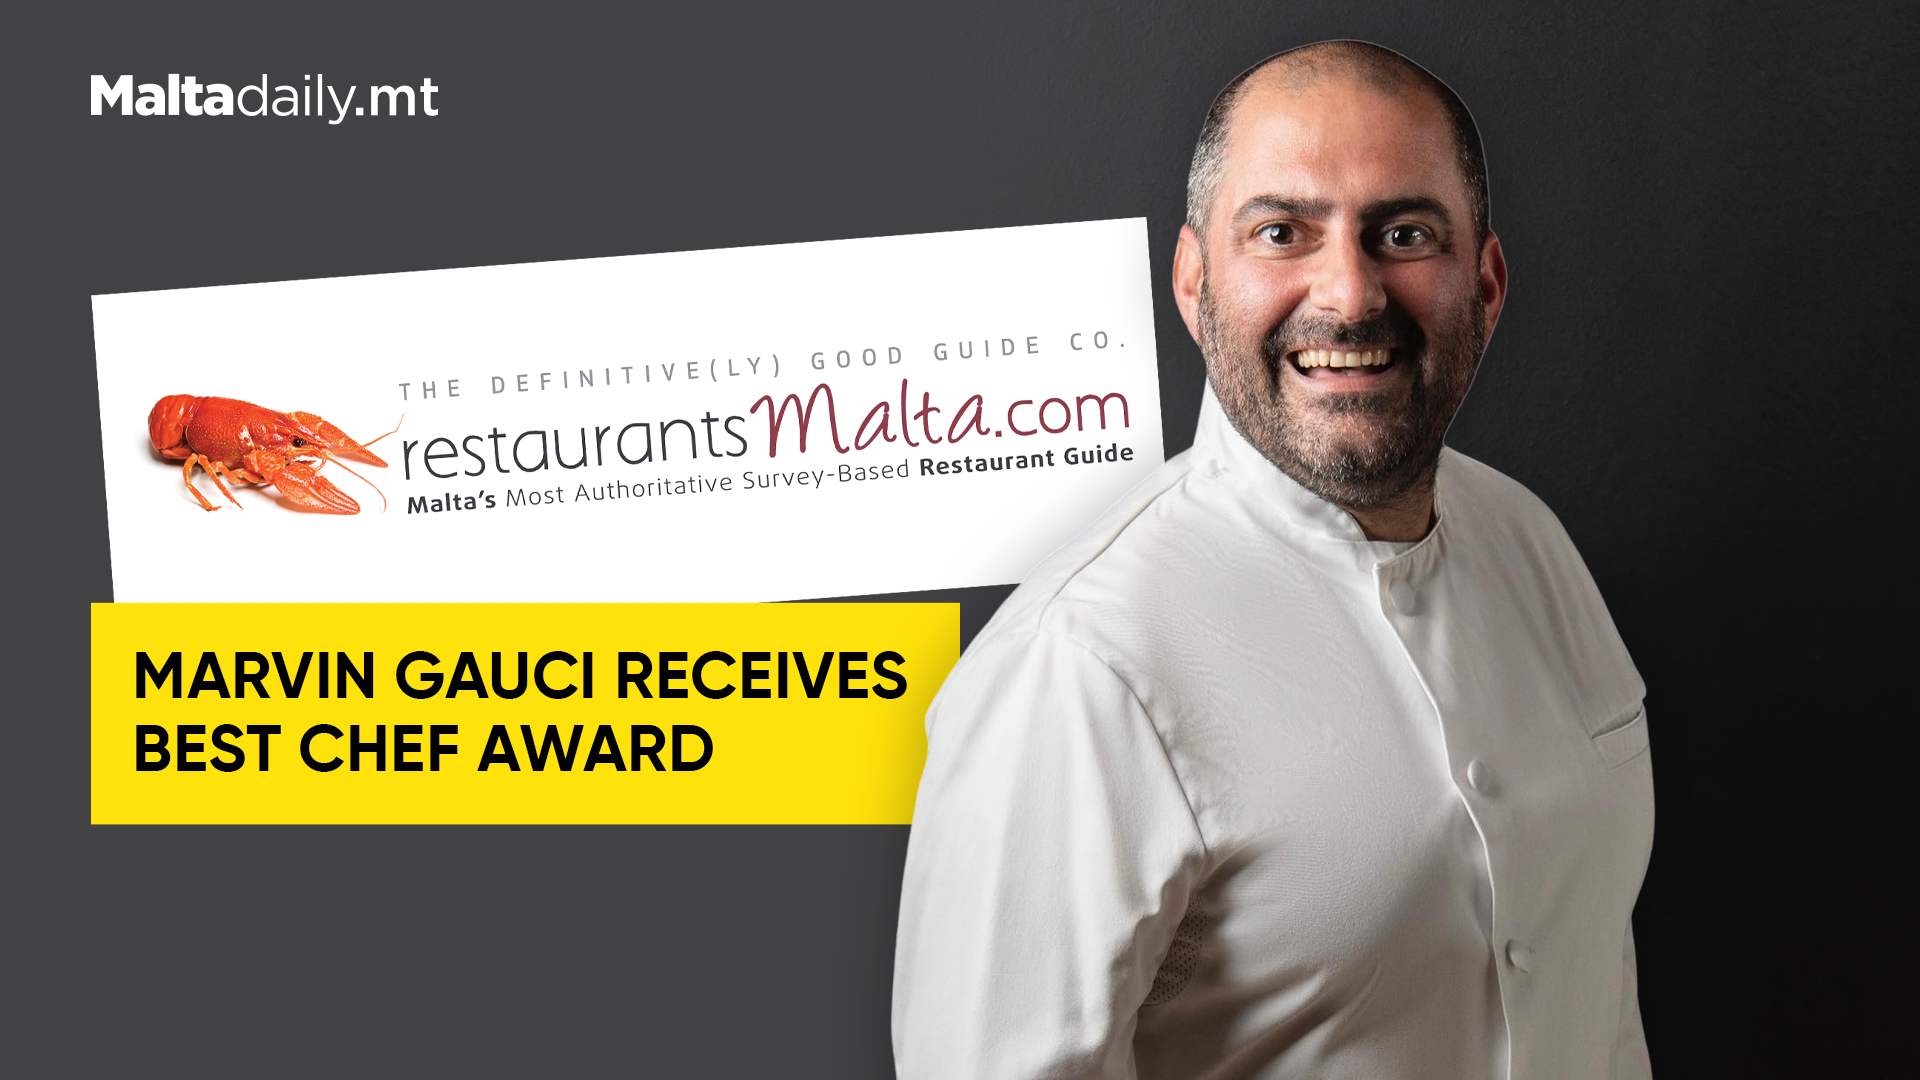 Marvin Gauci Receives Best Chef Award at The Definitive(ly) Good Guide to Restaurants Awards